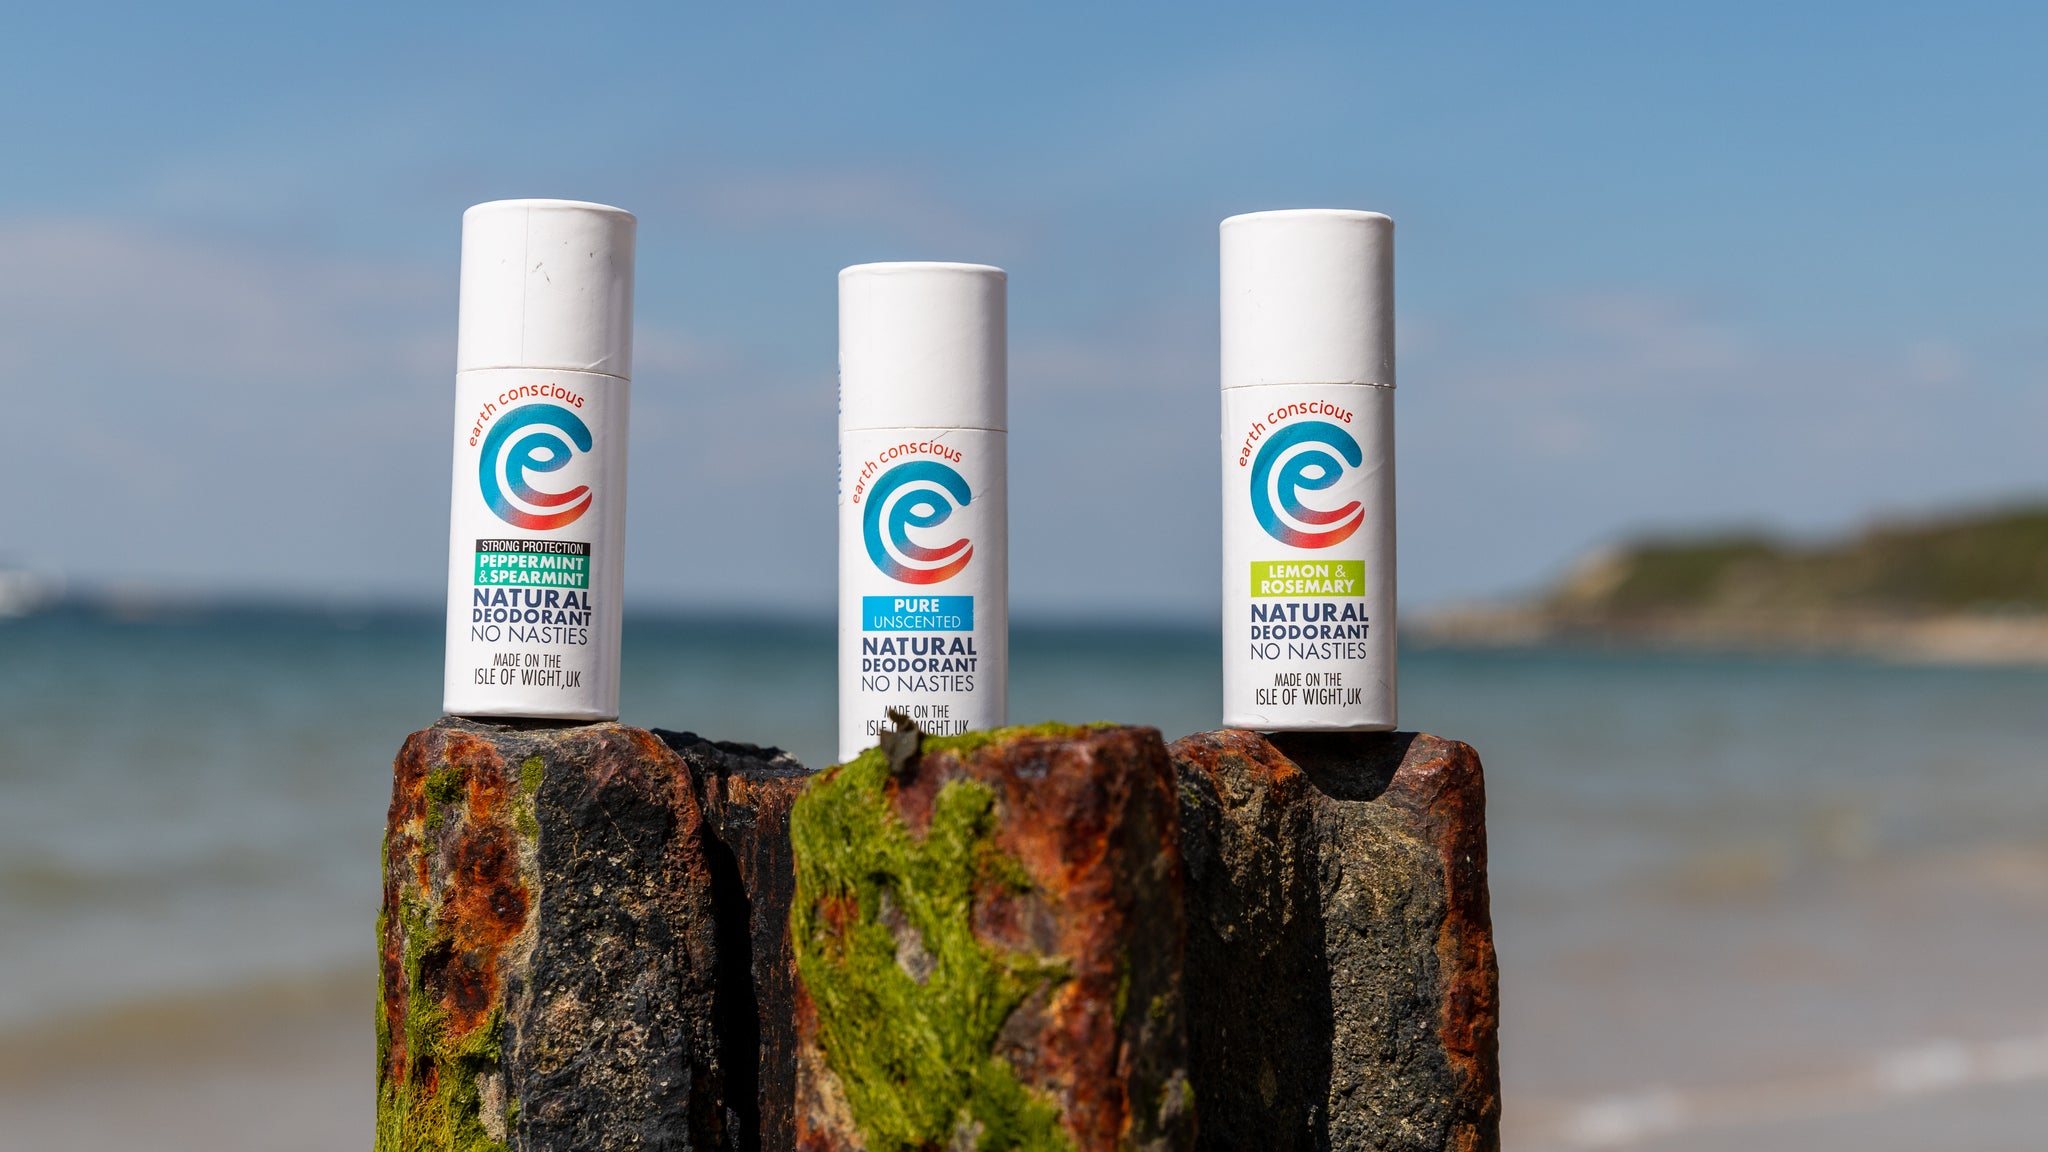 Earth Conscious Natural Deodorant Stick is Here!